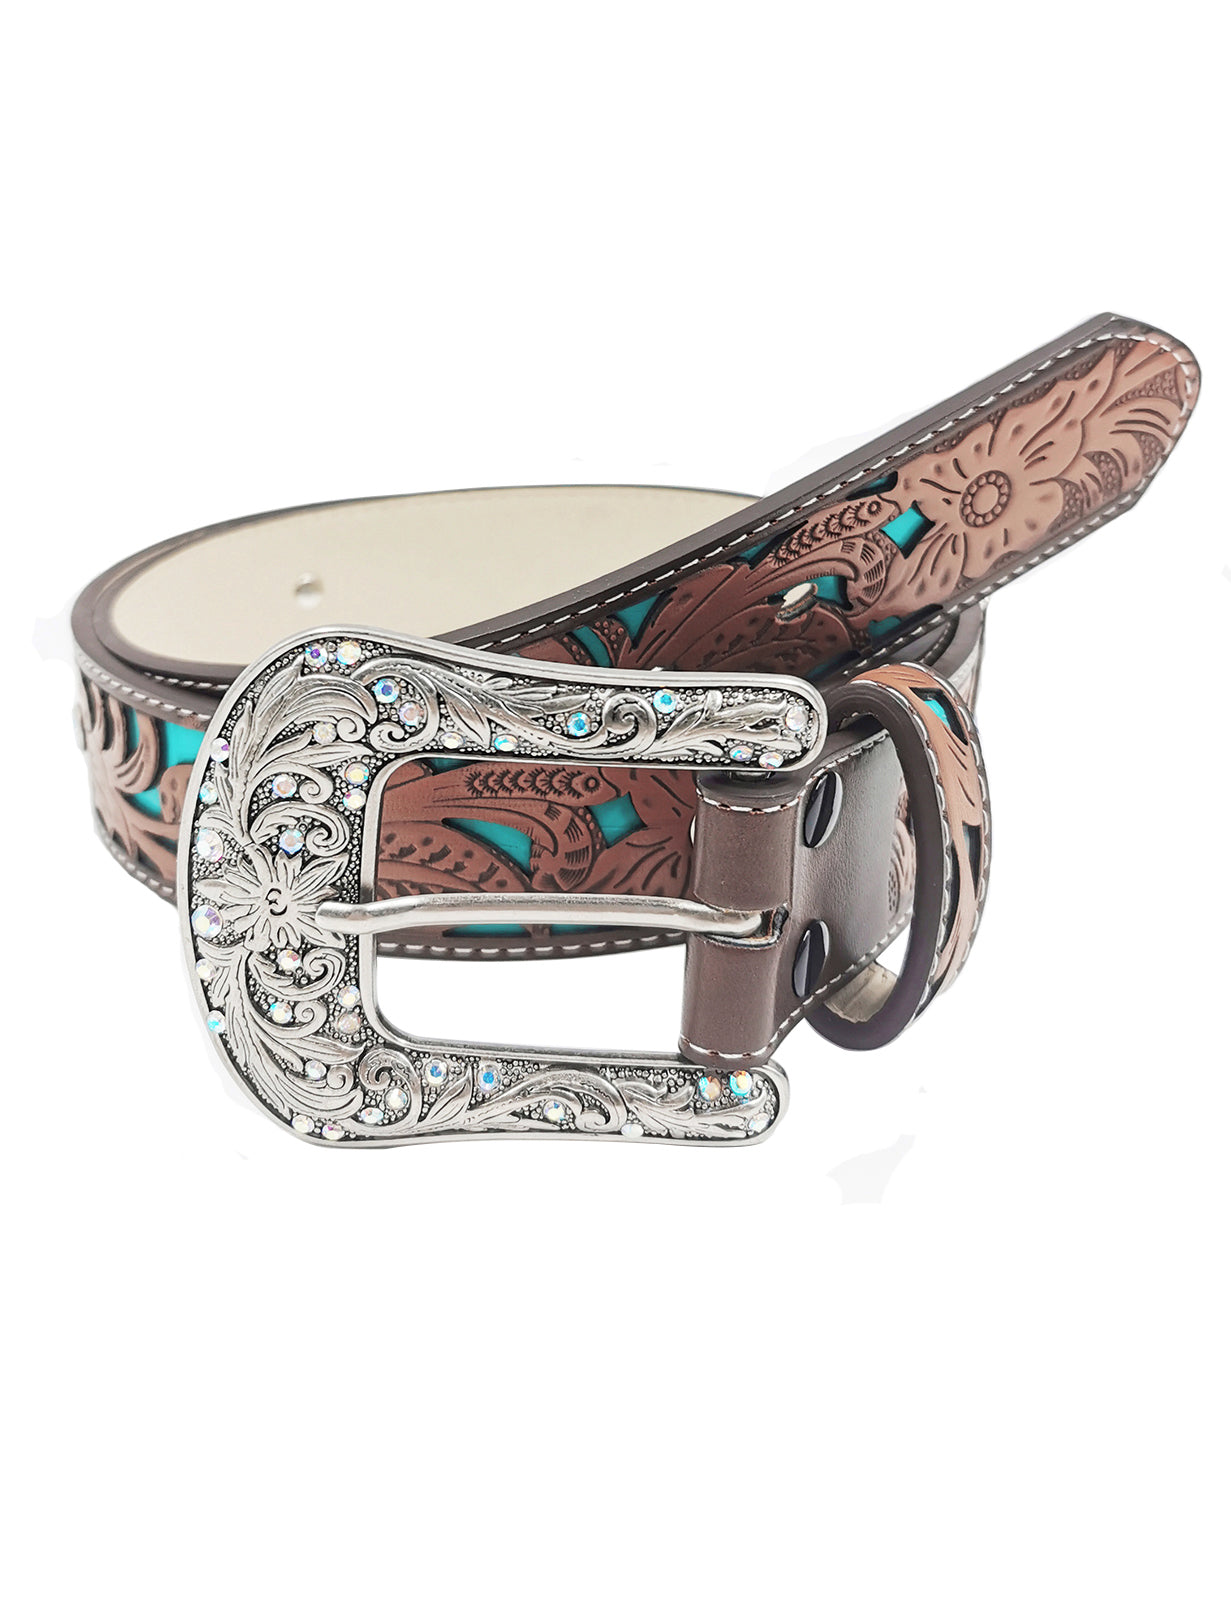 Topacc Western Turquoise Belts for Women Men Cowgirl Cowboy Country Fashion Belt for Jeans Pants Girls Fit waist:31-33in